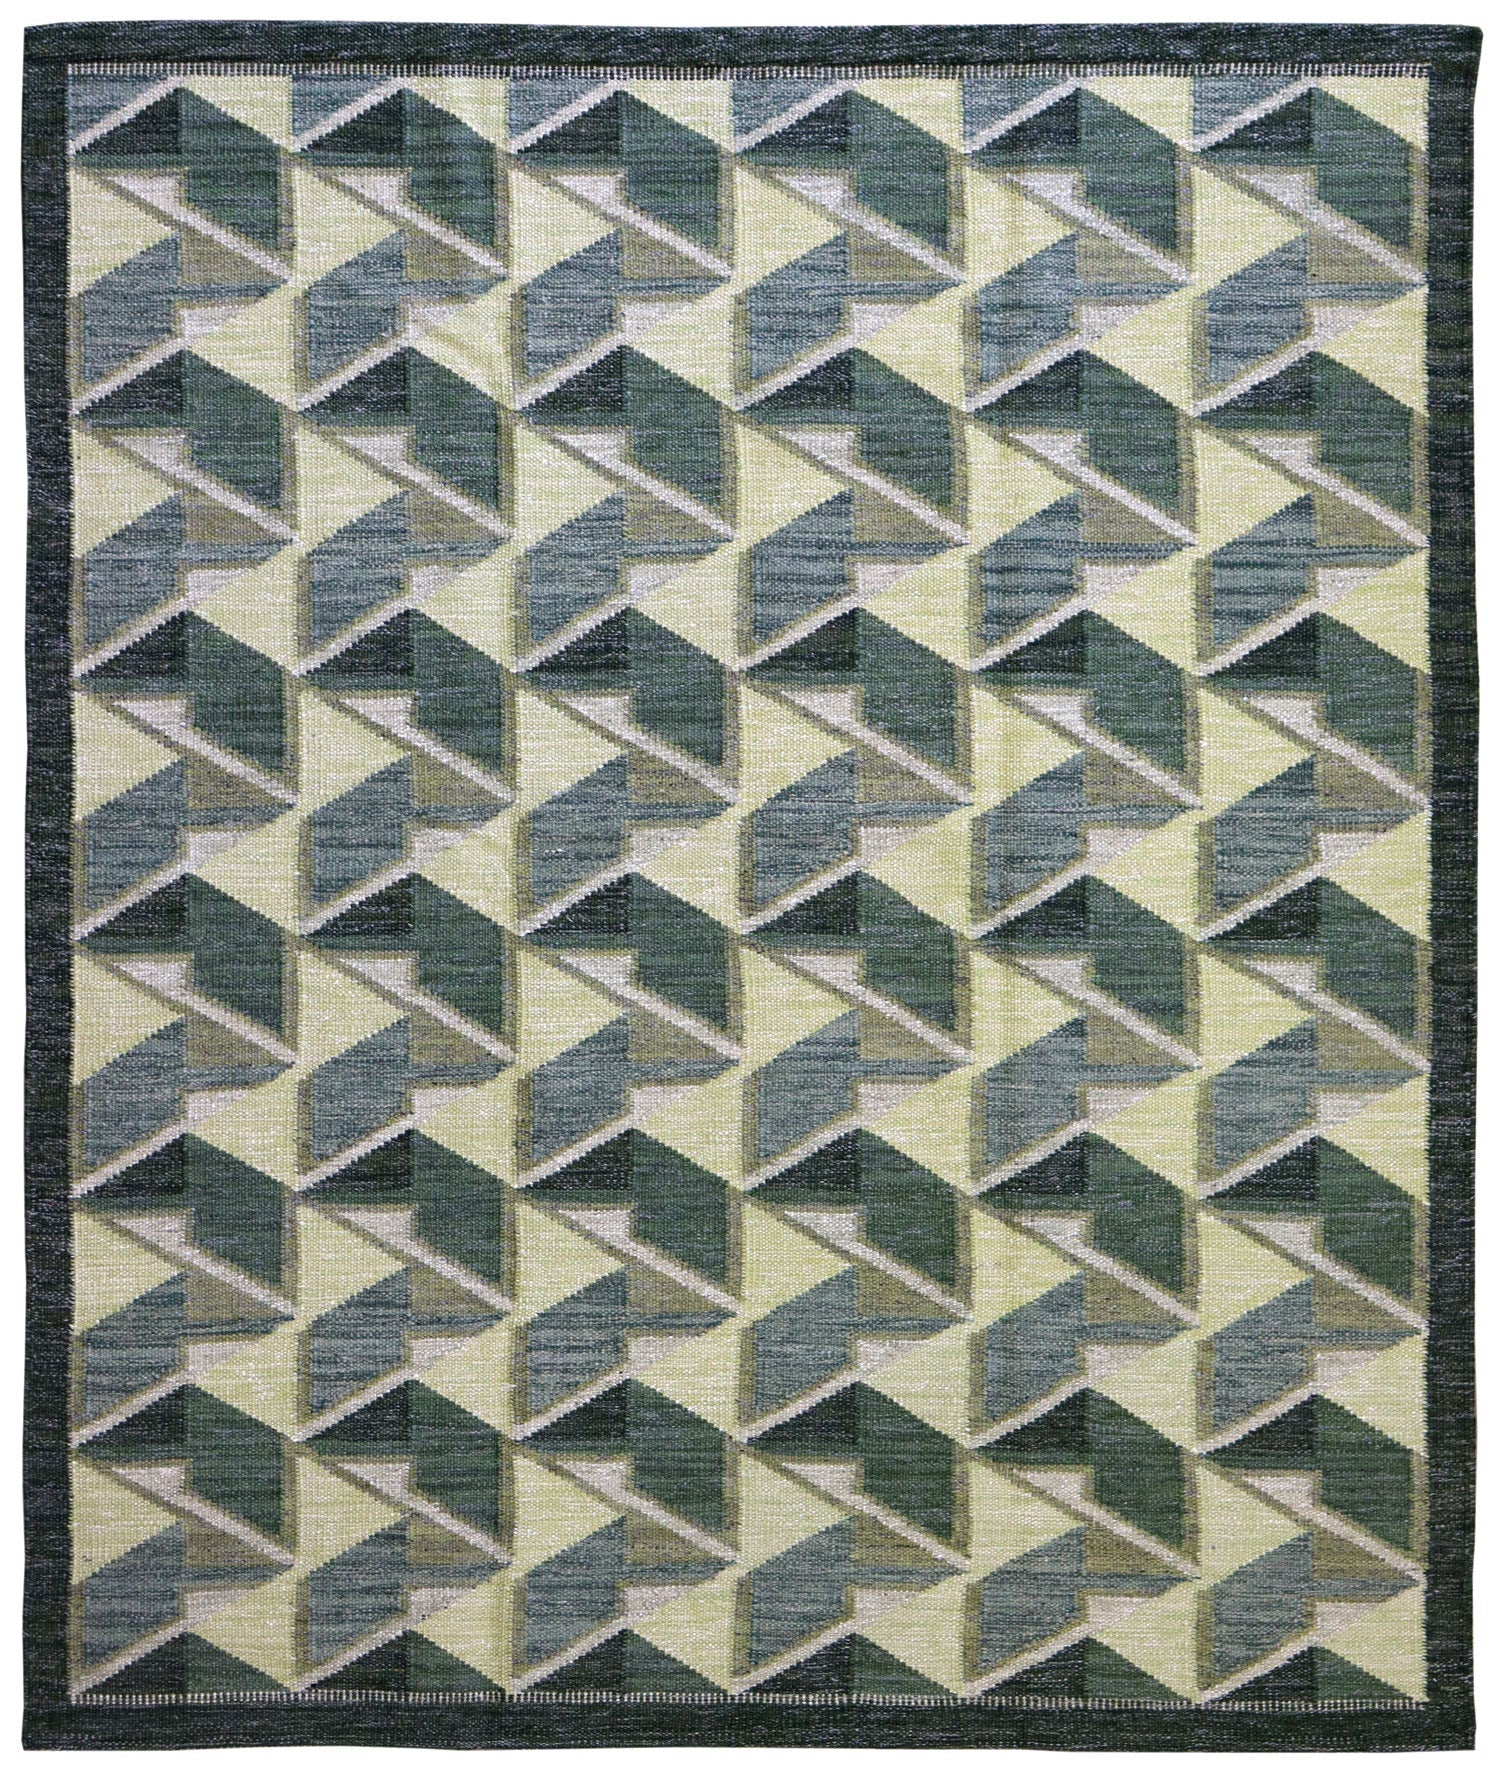 Scandinavian Scatter Rug with Green Geometric Patterns